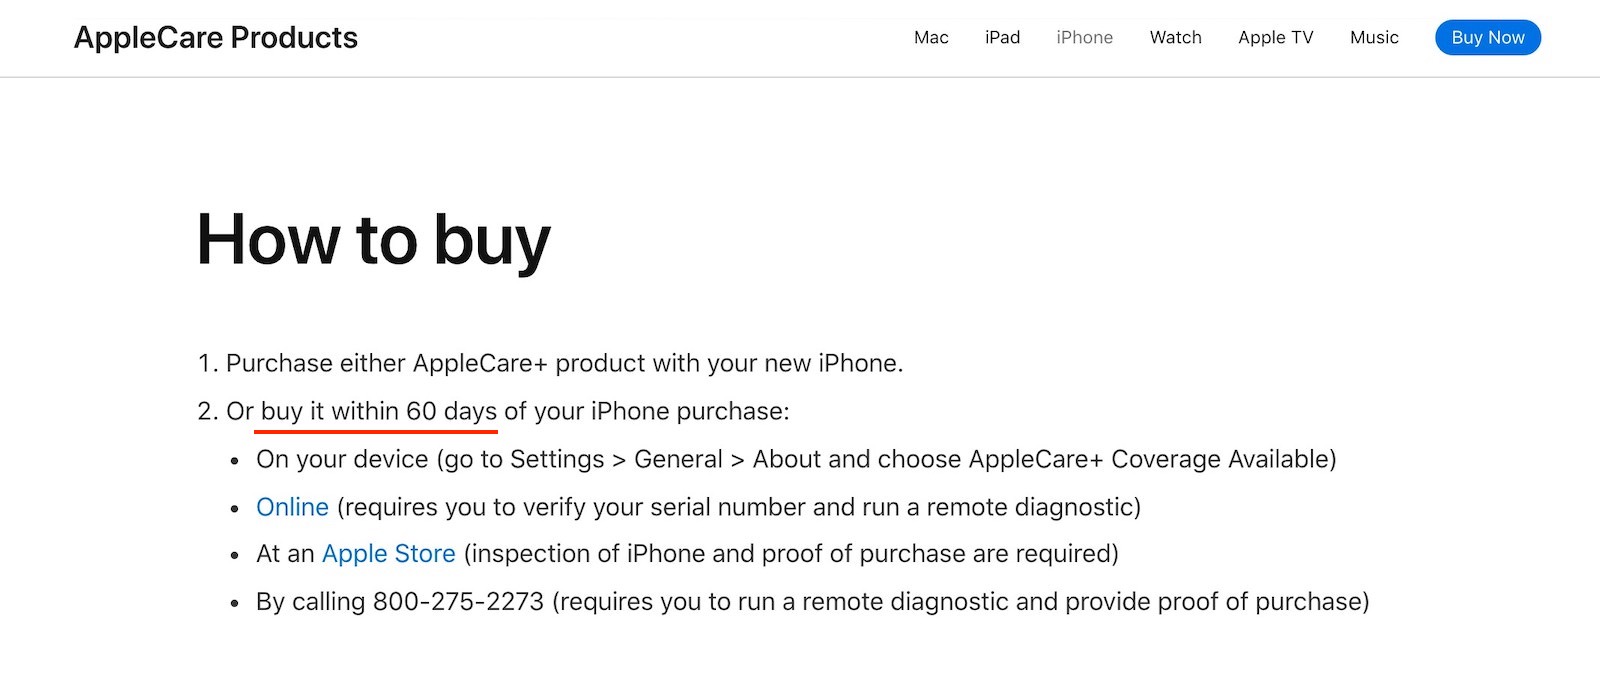 apple-care-us-and-canada.jpg